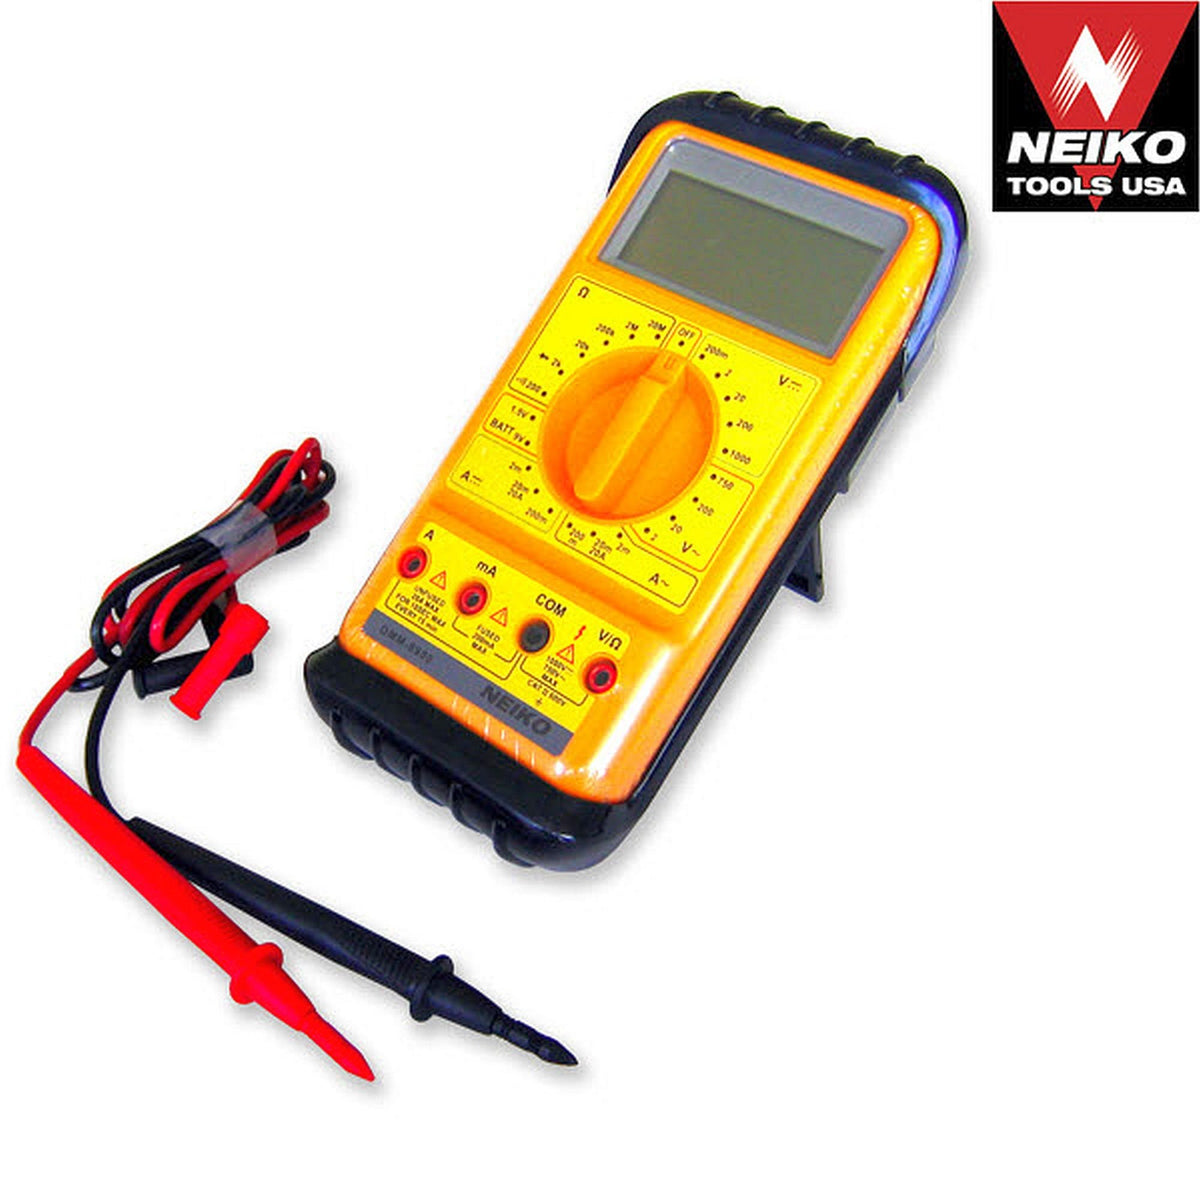 Handheld Pocket AC/DC Digital Multimeter Tester with Stand, Extra Large LCD Screen Display